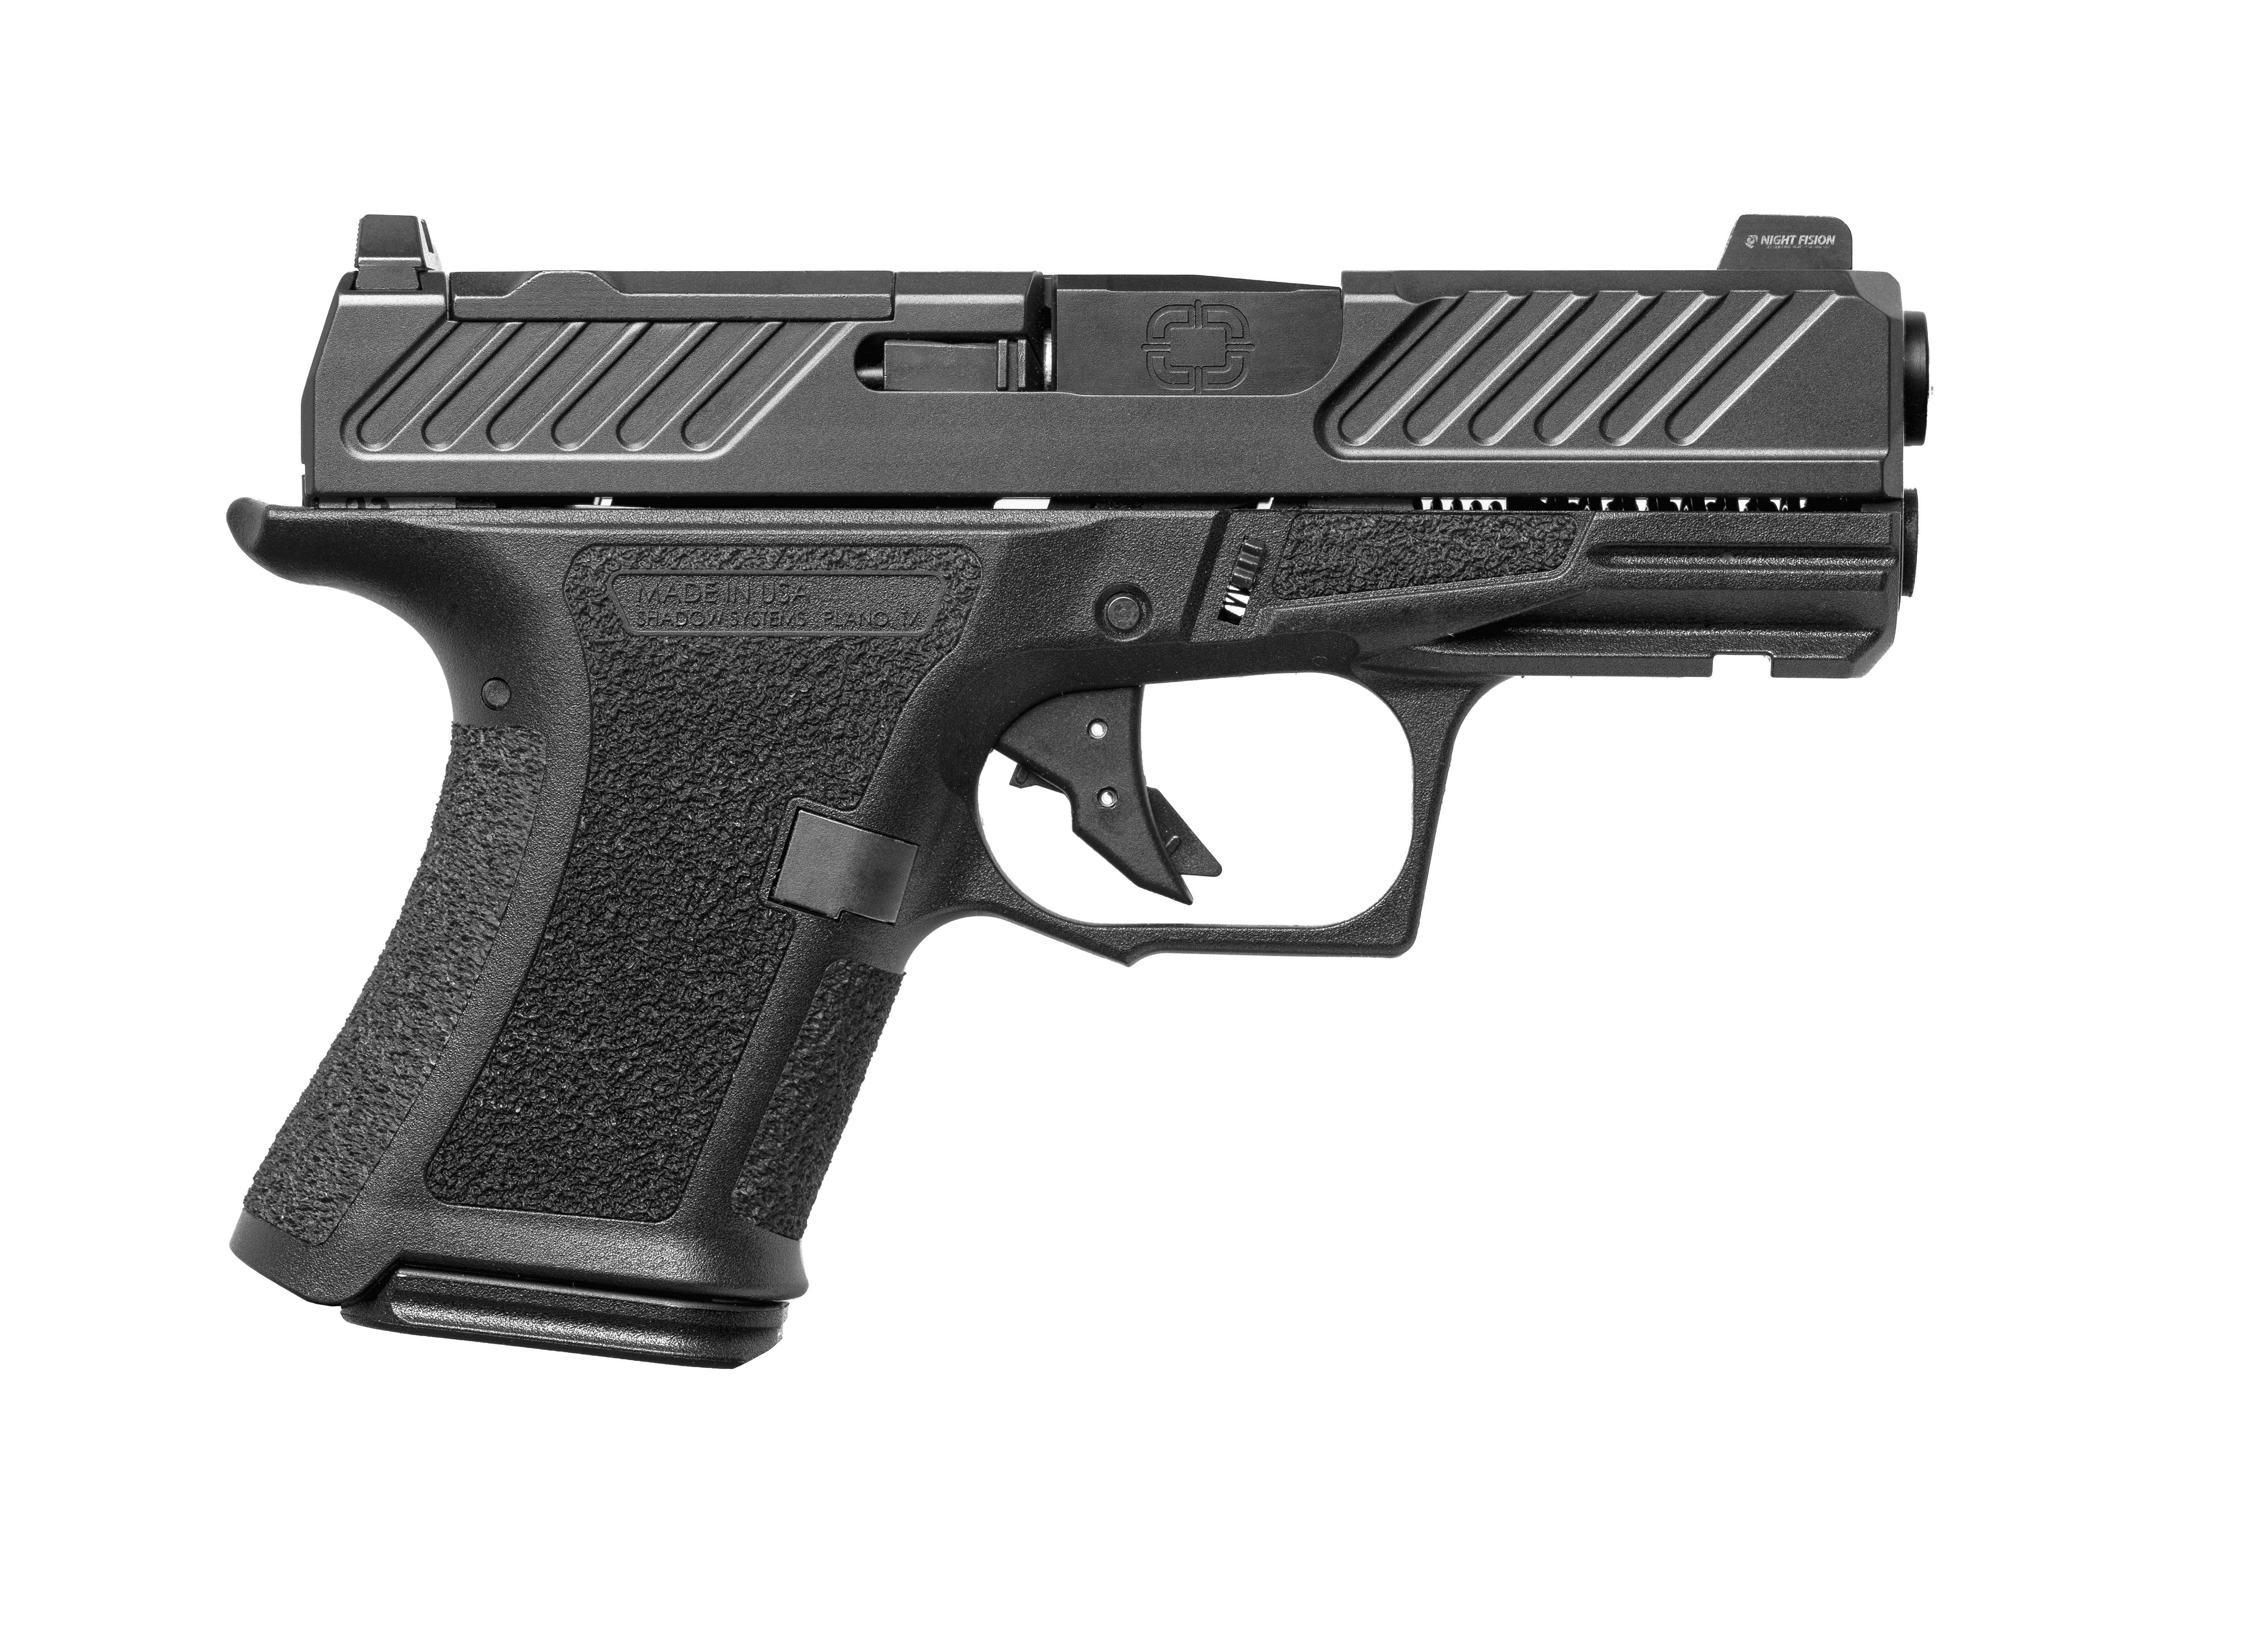 SHADOW CR920 COMBAT OR 9MM